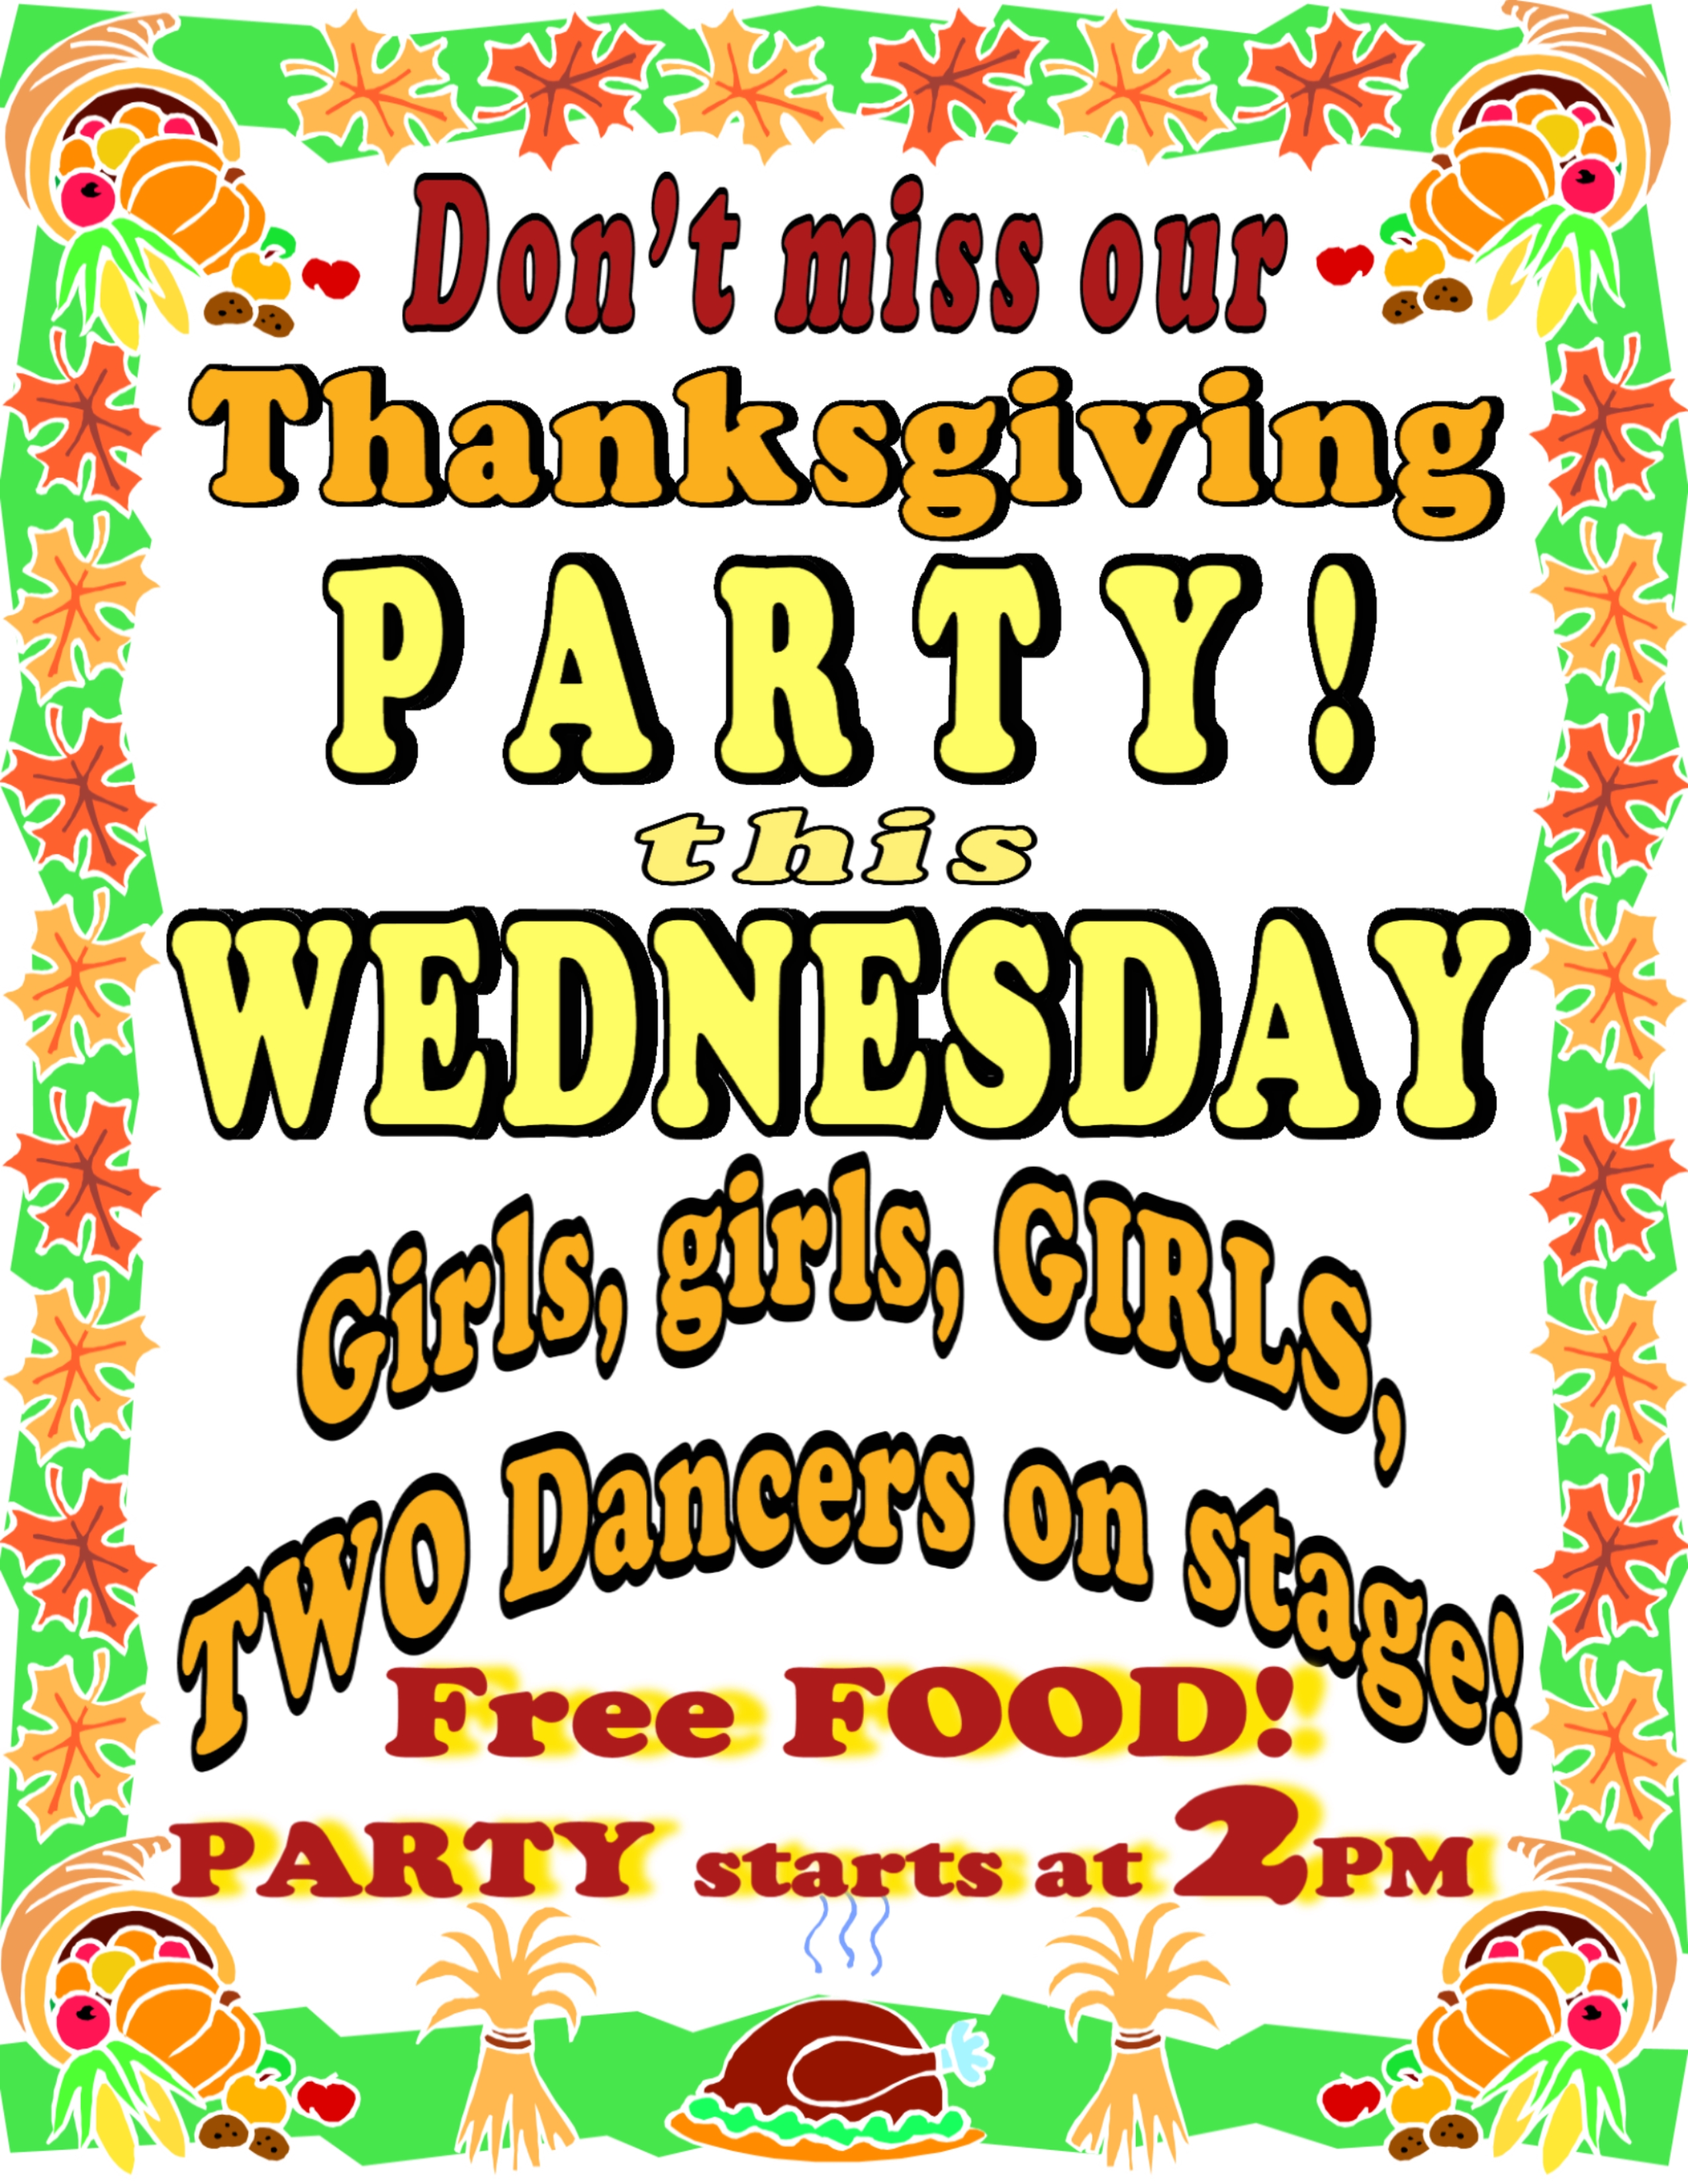 This WEDNESDAY, Nov. 21st - PARTY!